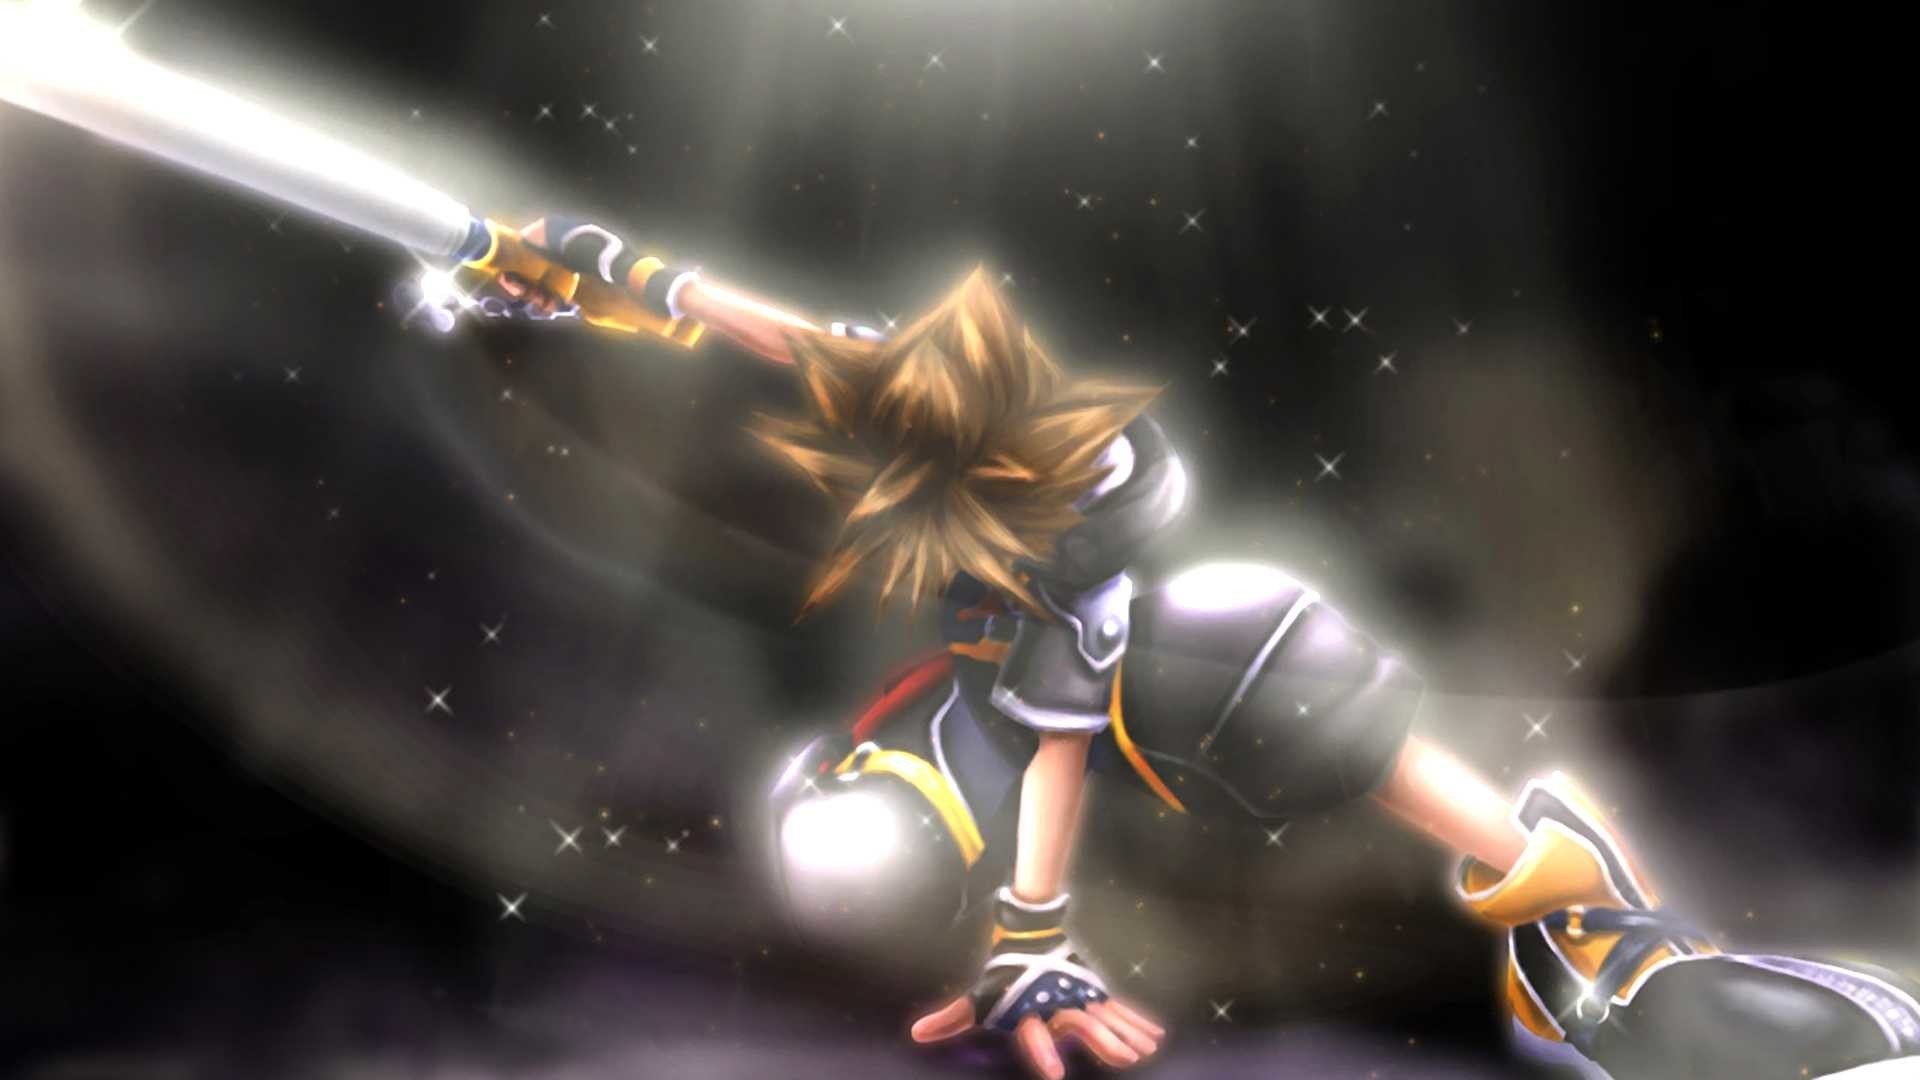 1920x1080  Kingdom Hearts Wallpaper Hd Images Backgrounds Media File For  Mobile